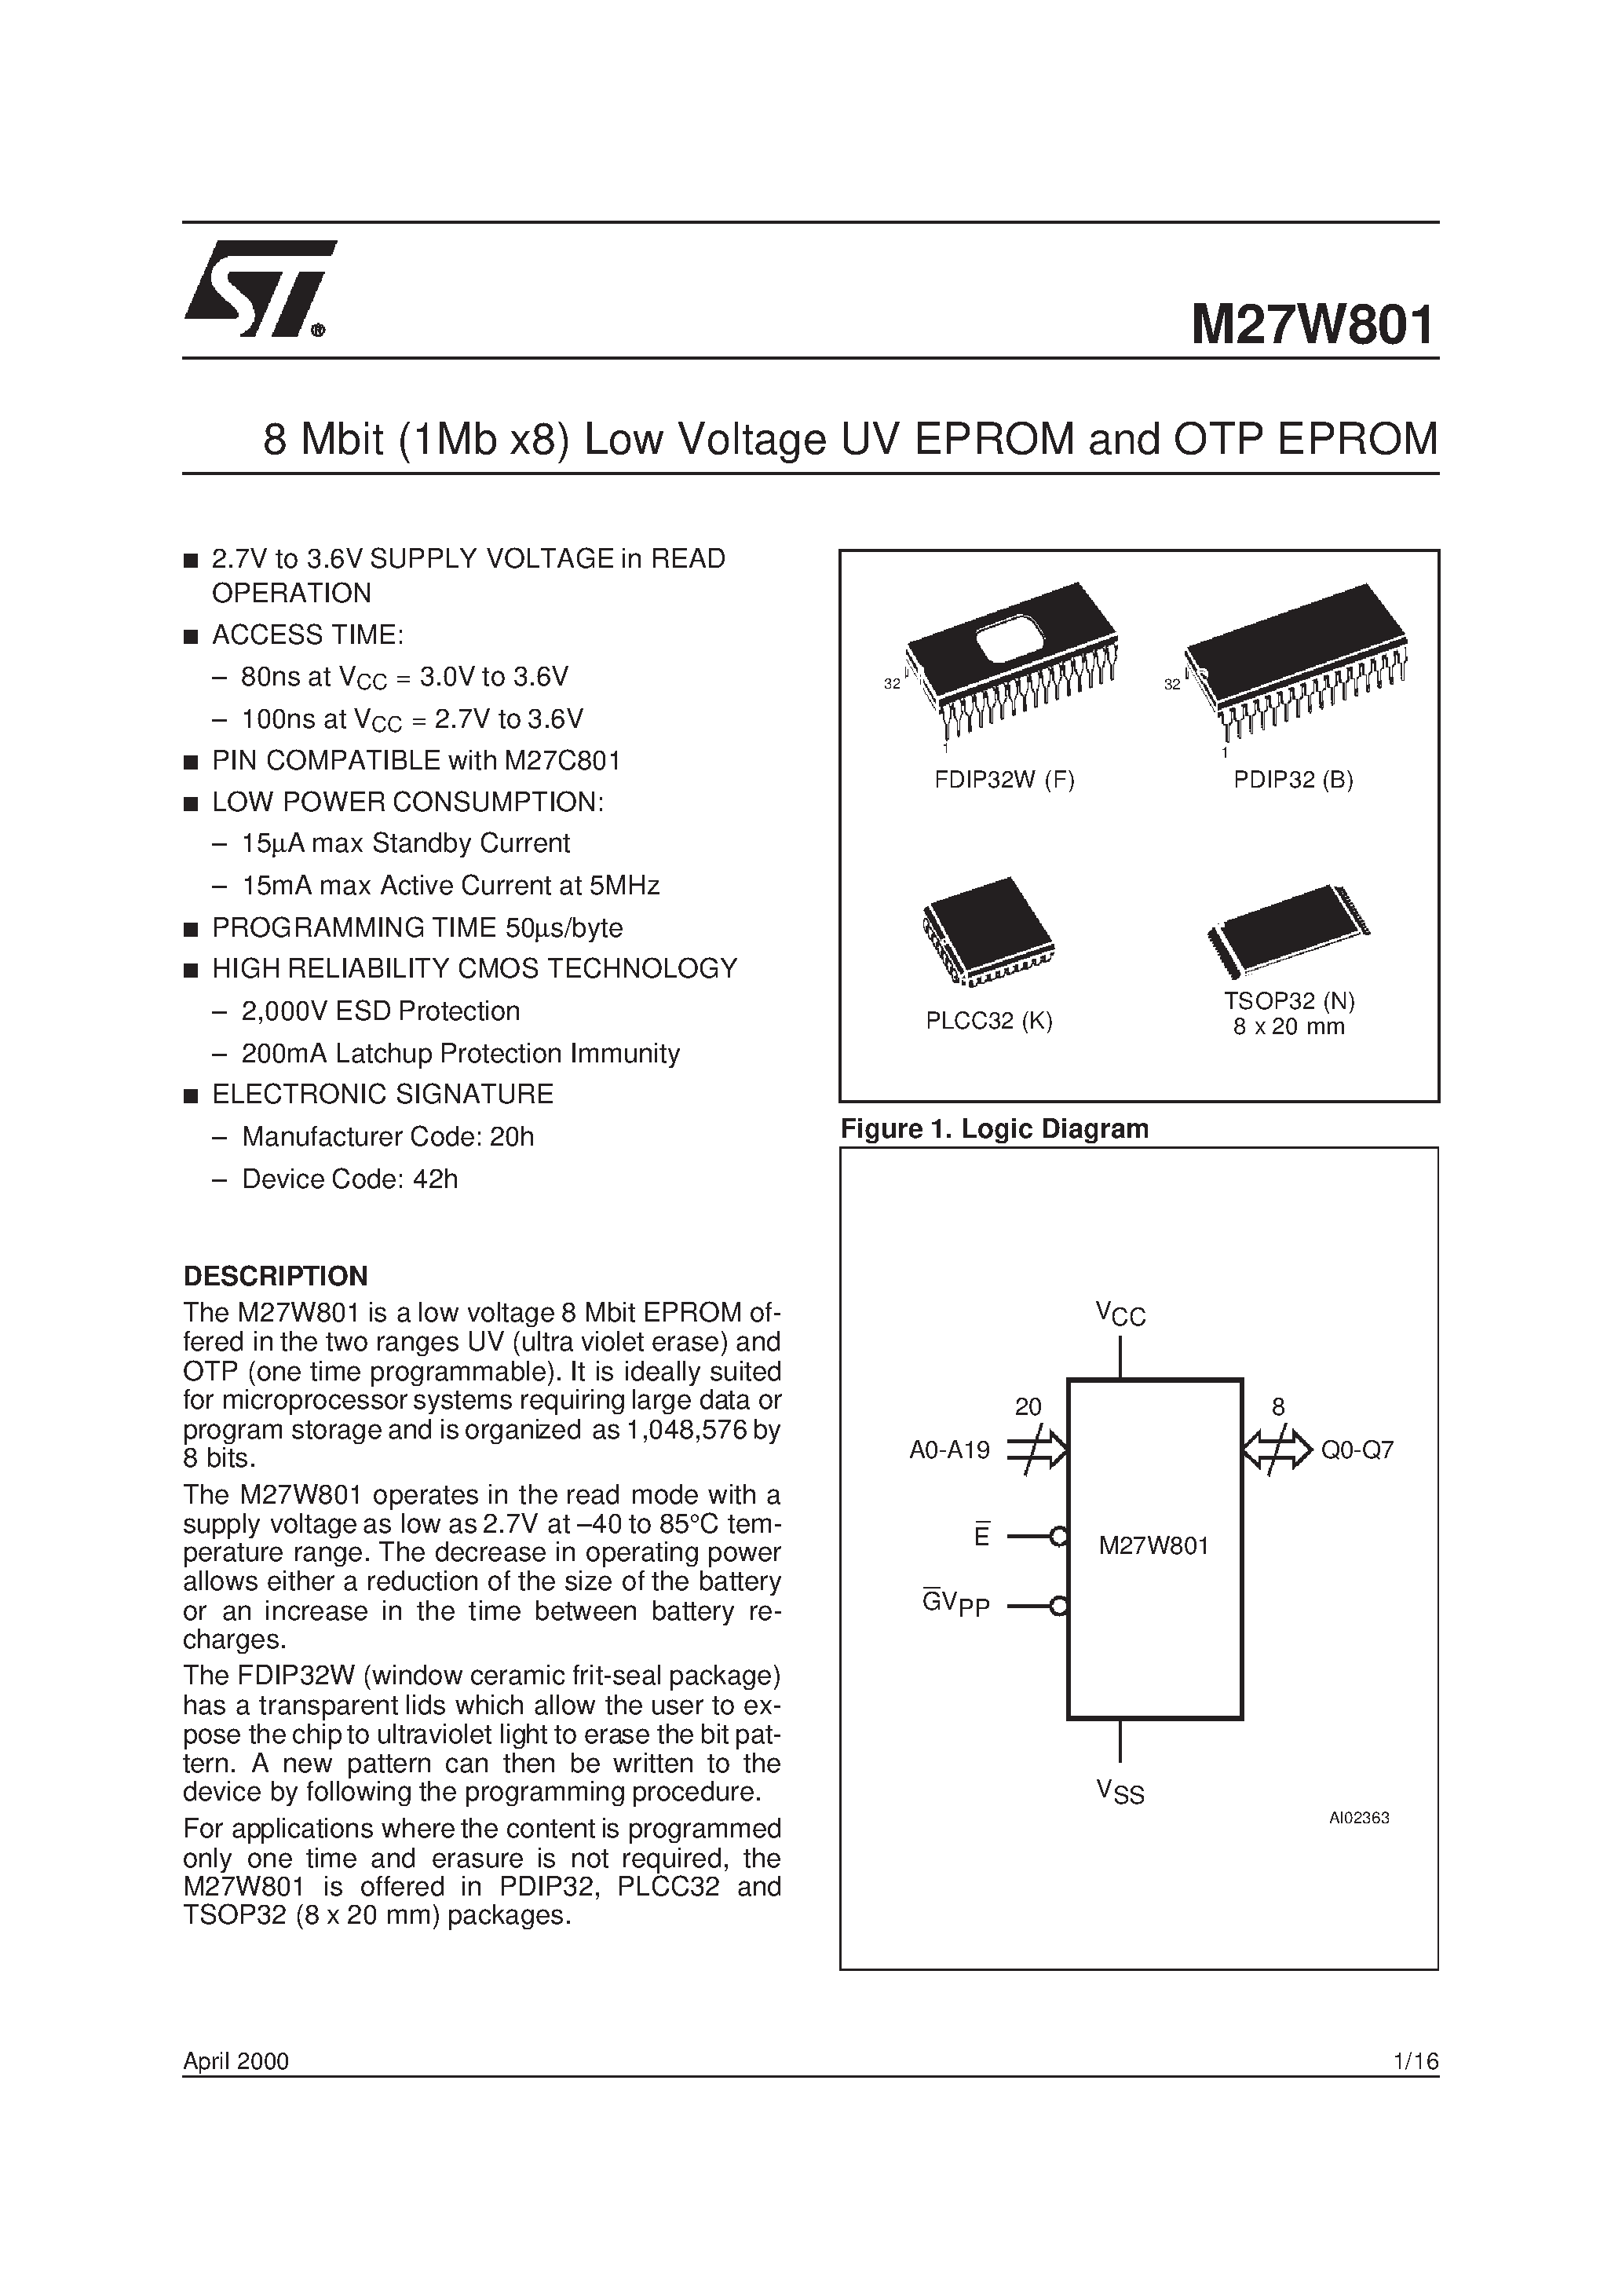 Datasheet M27W801-120B6TR - 8 Mbit 1Mb x8 Low Voltage UV EPROM and OTP EPROM page 1